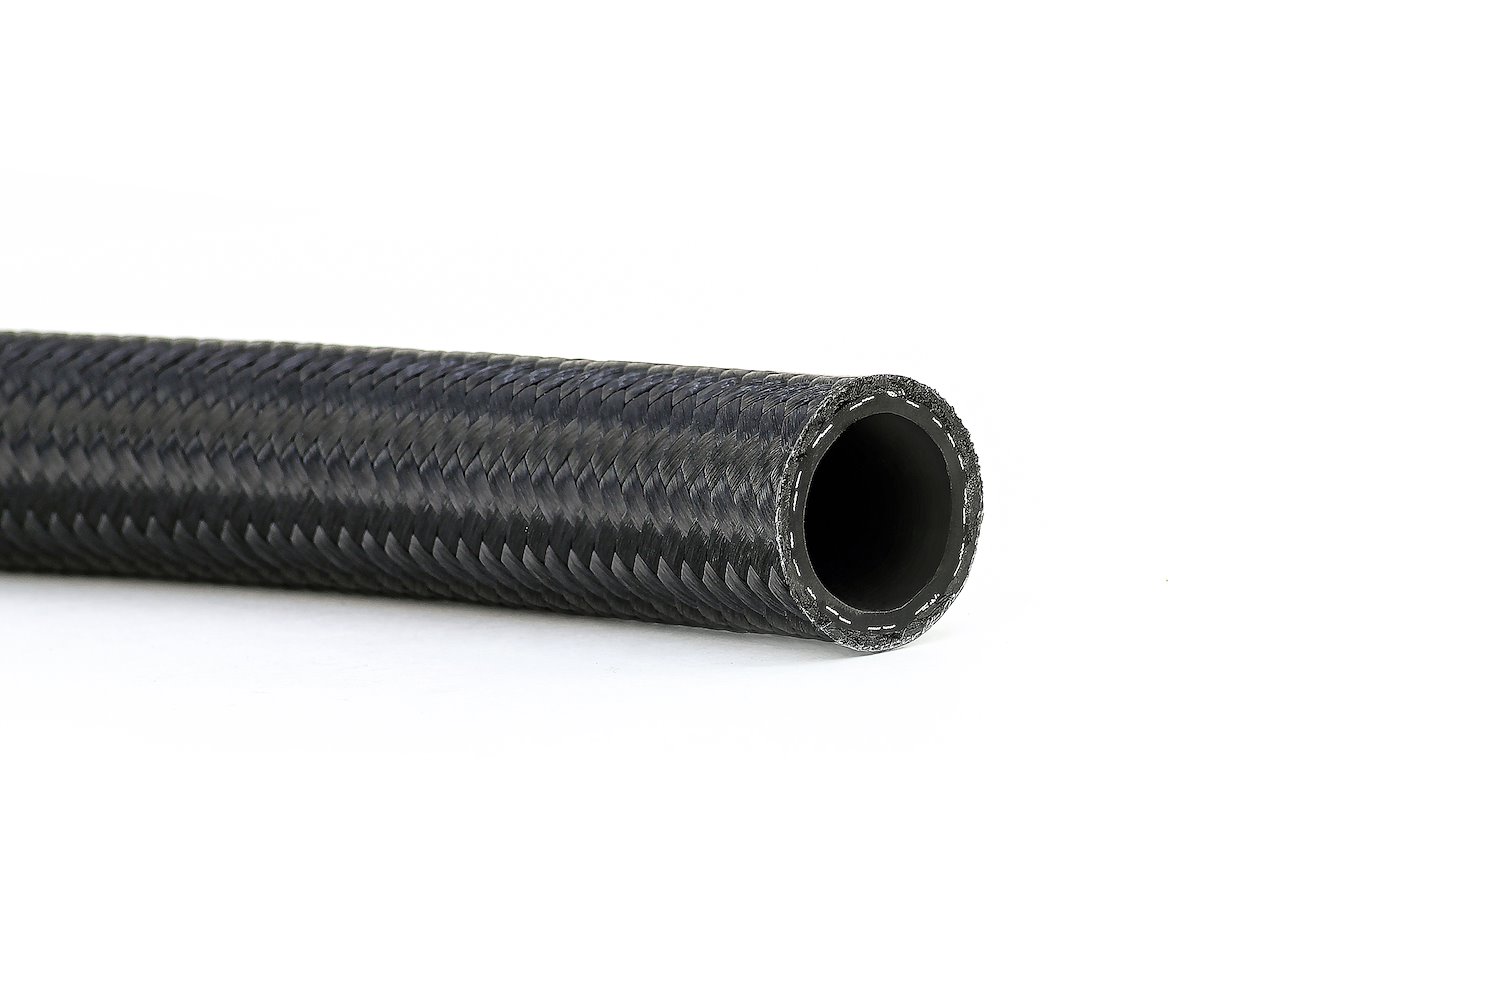 250-12 250 Series Nylon Braided Rubber Hose, Stainless Steel Reinforced Hose, For 250 Series Reusable An Fittings